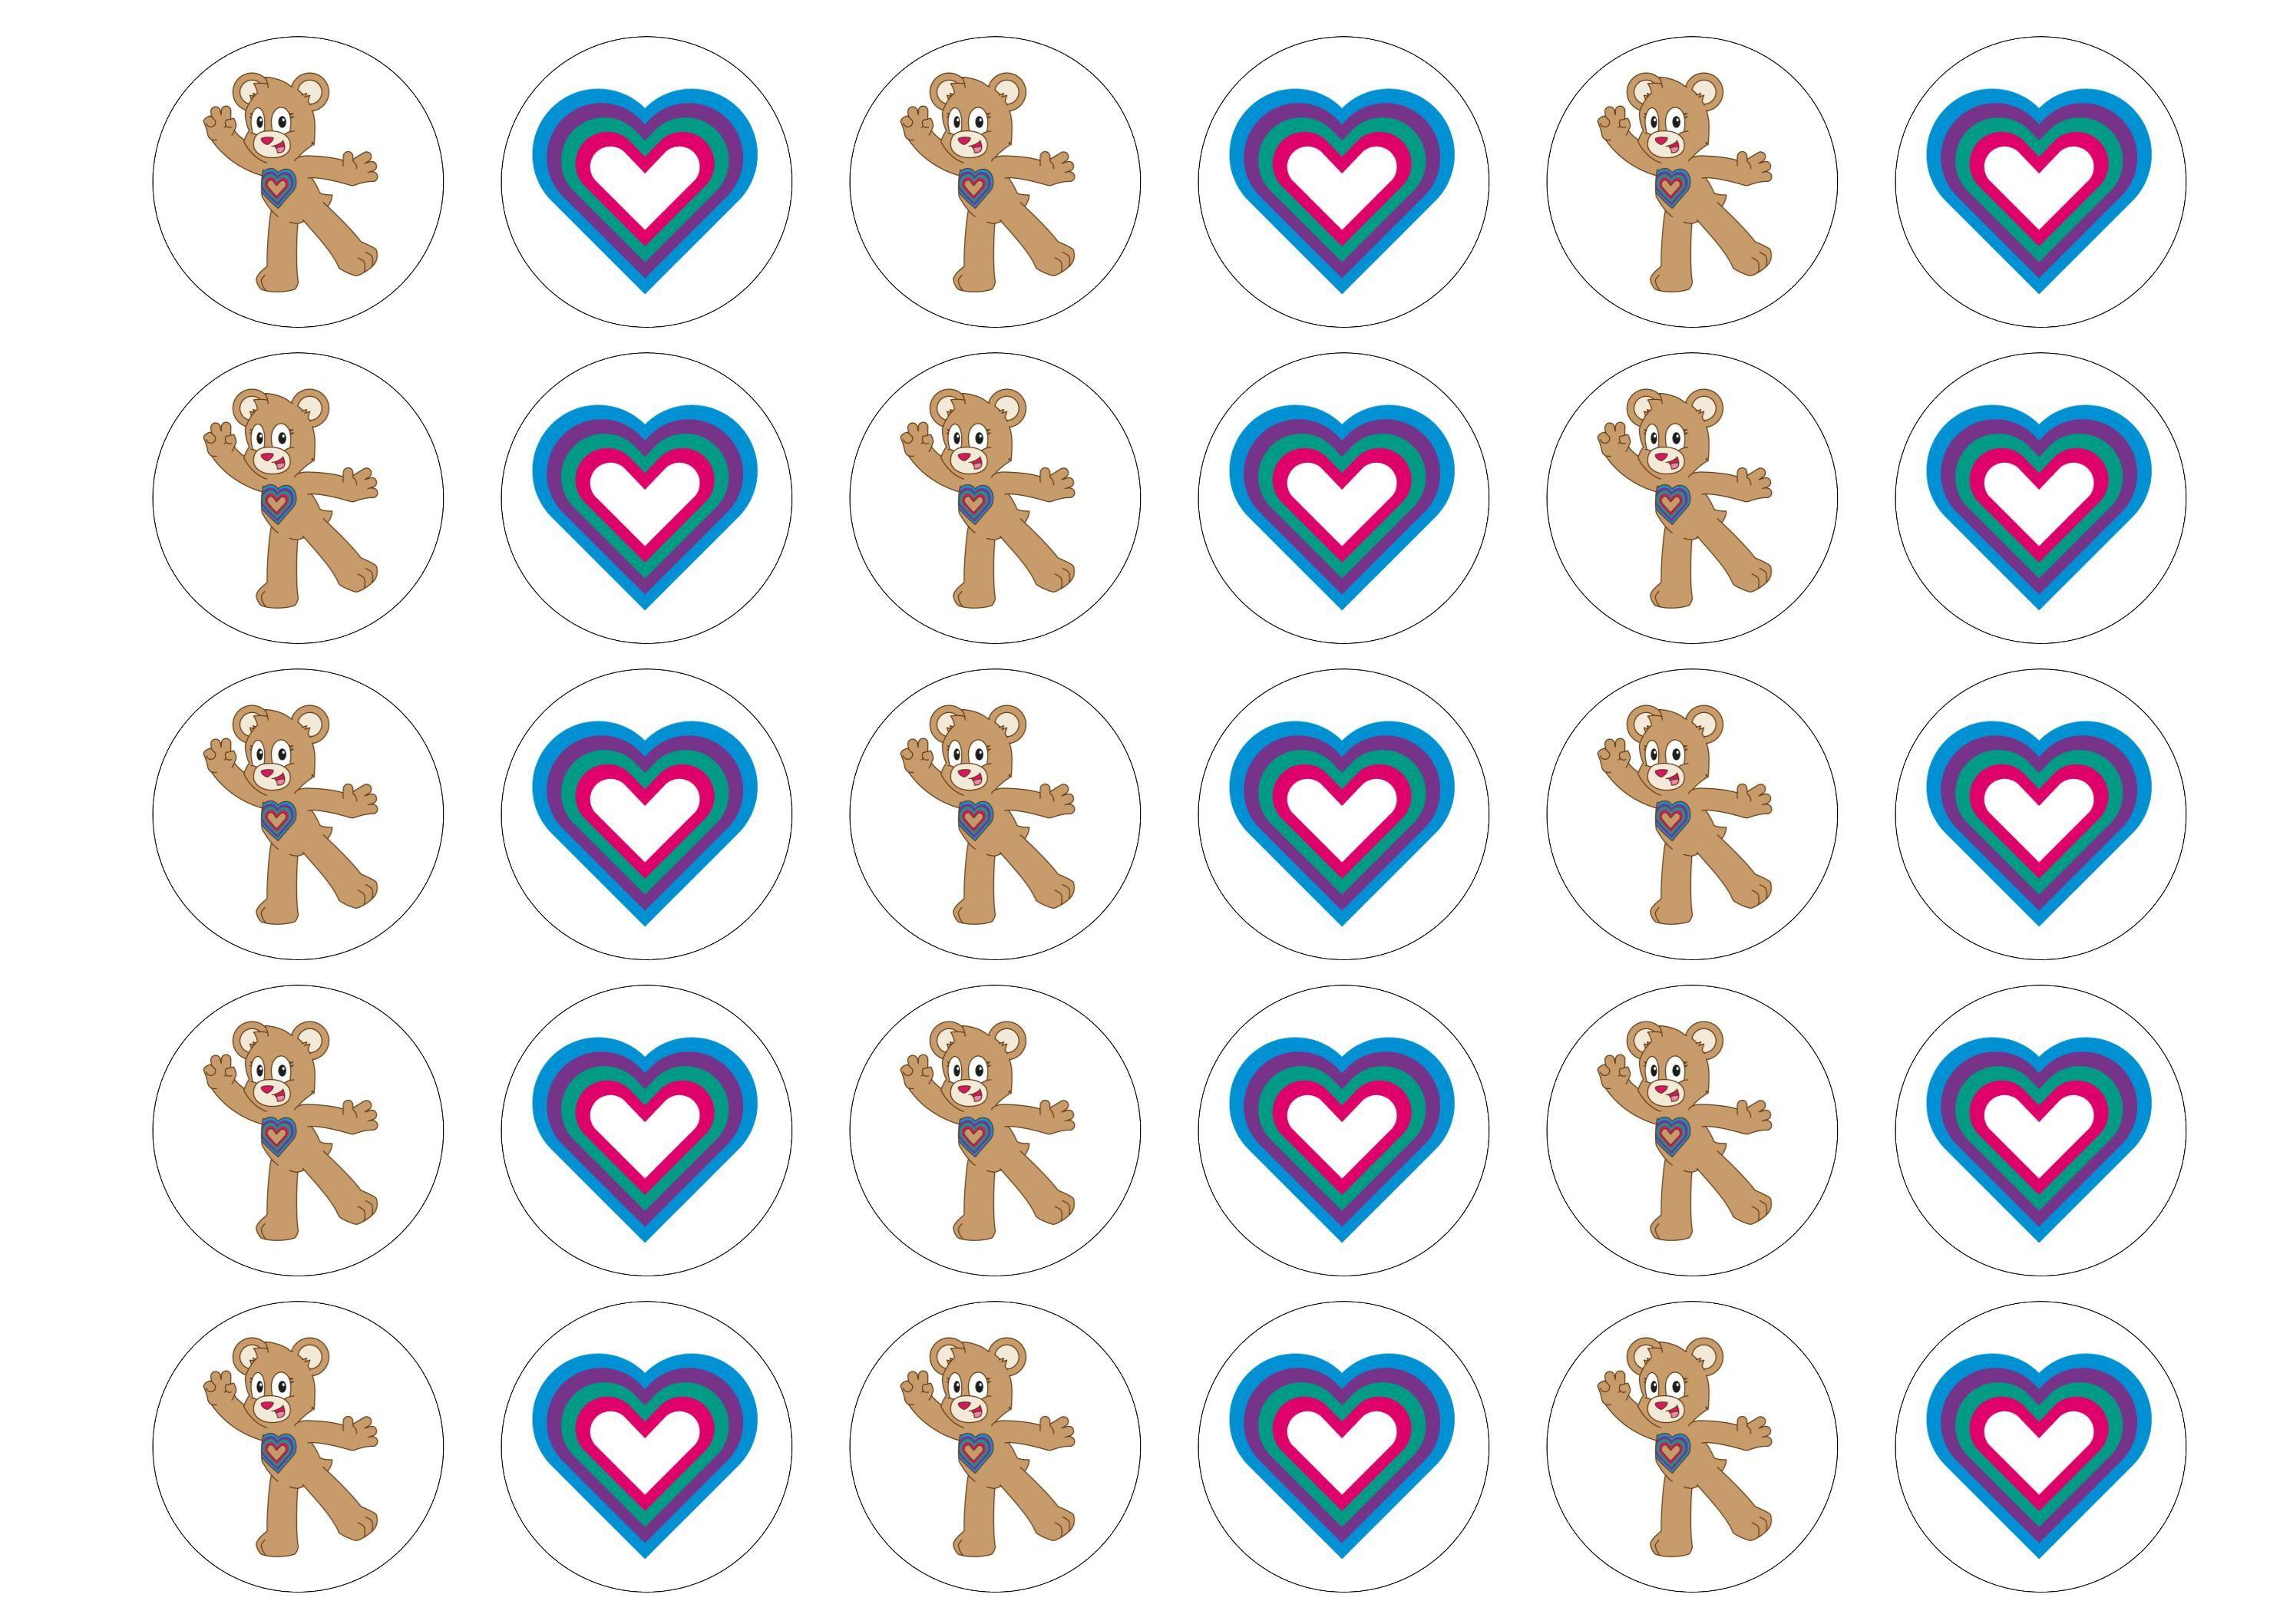 Edible cupcake toppers supporting Children's Heart Surgery Fund